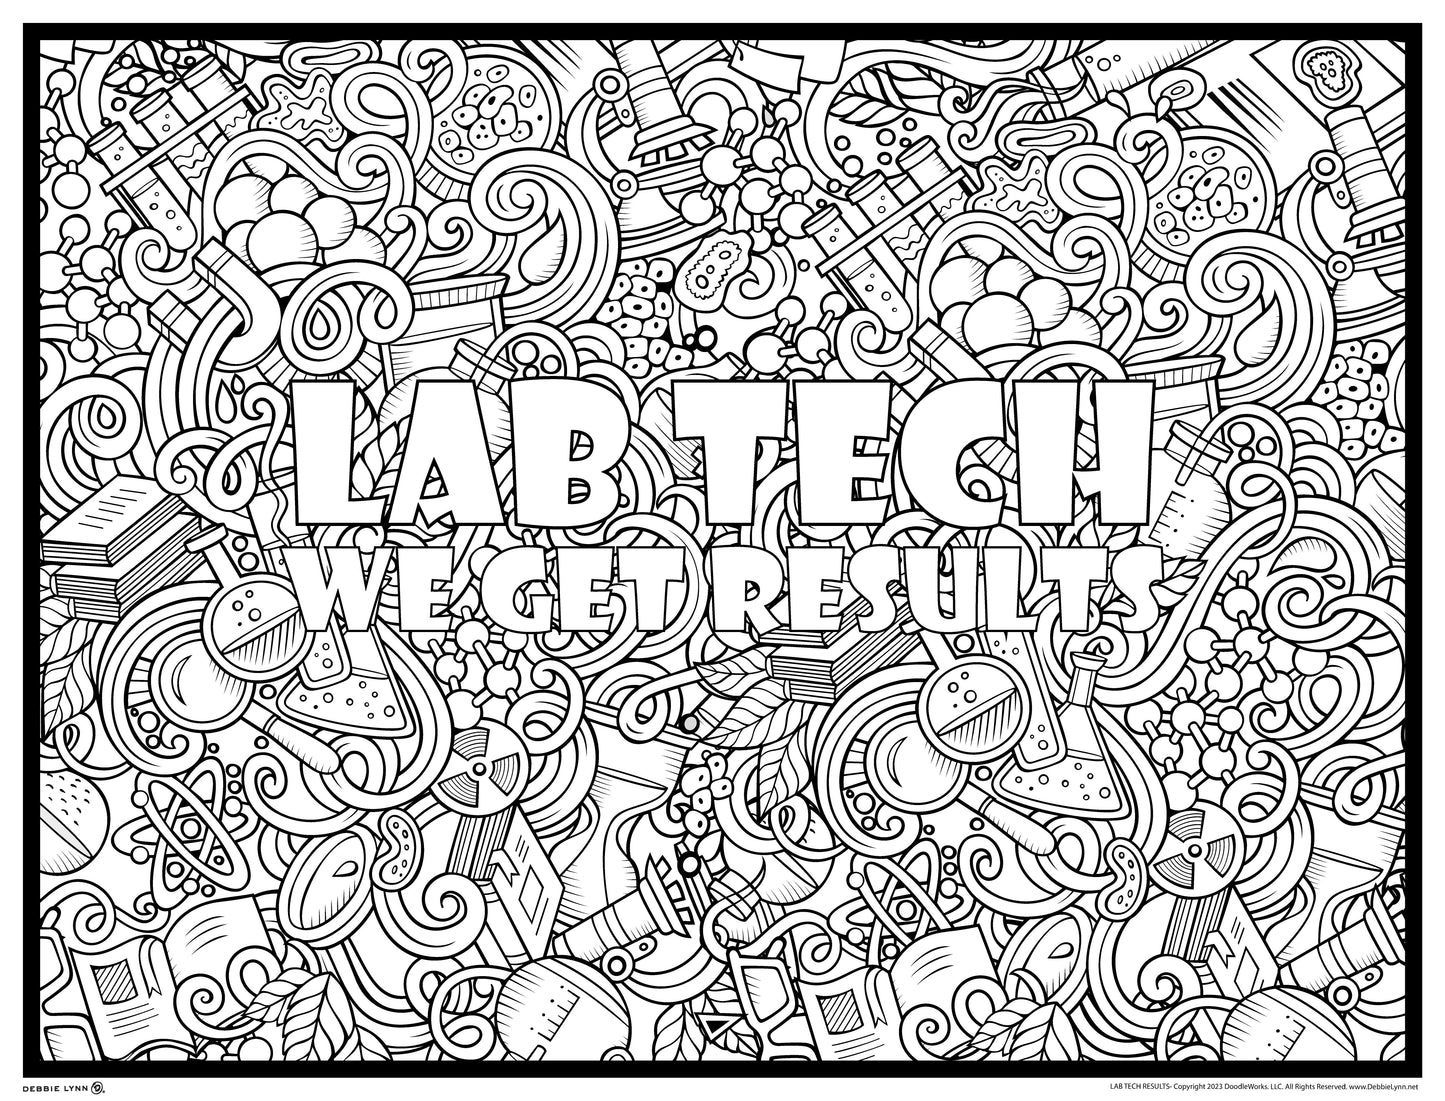 Lab Techs Get Results Personalized Giant Coloring Poster 46"x60"